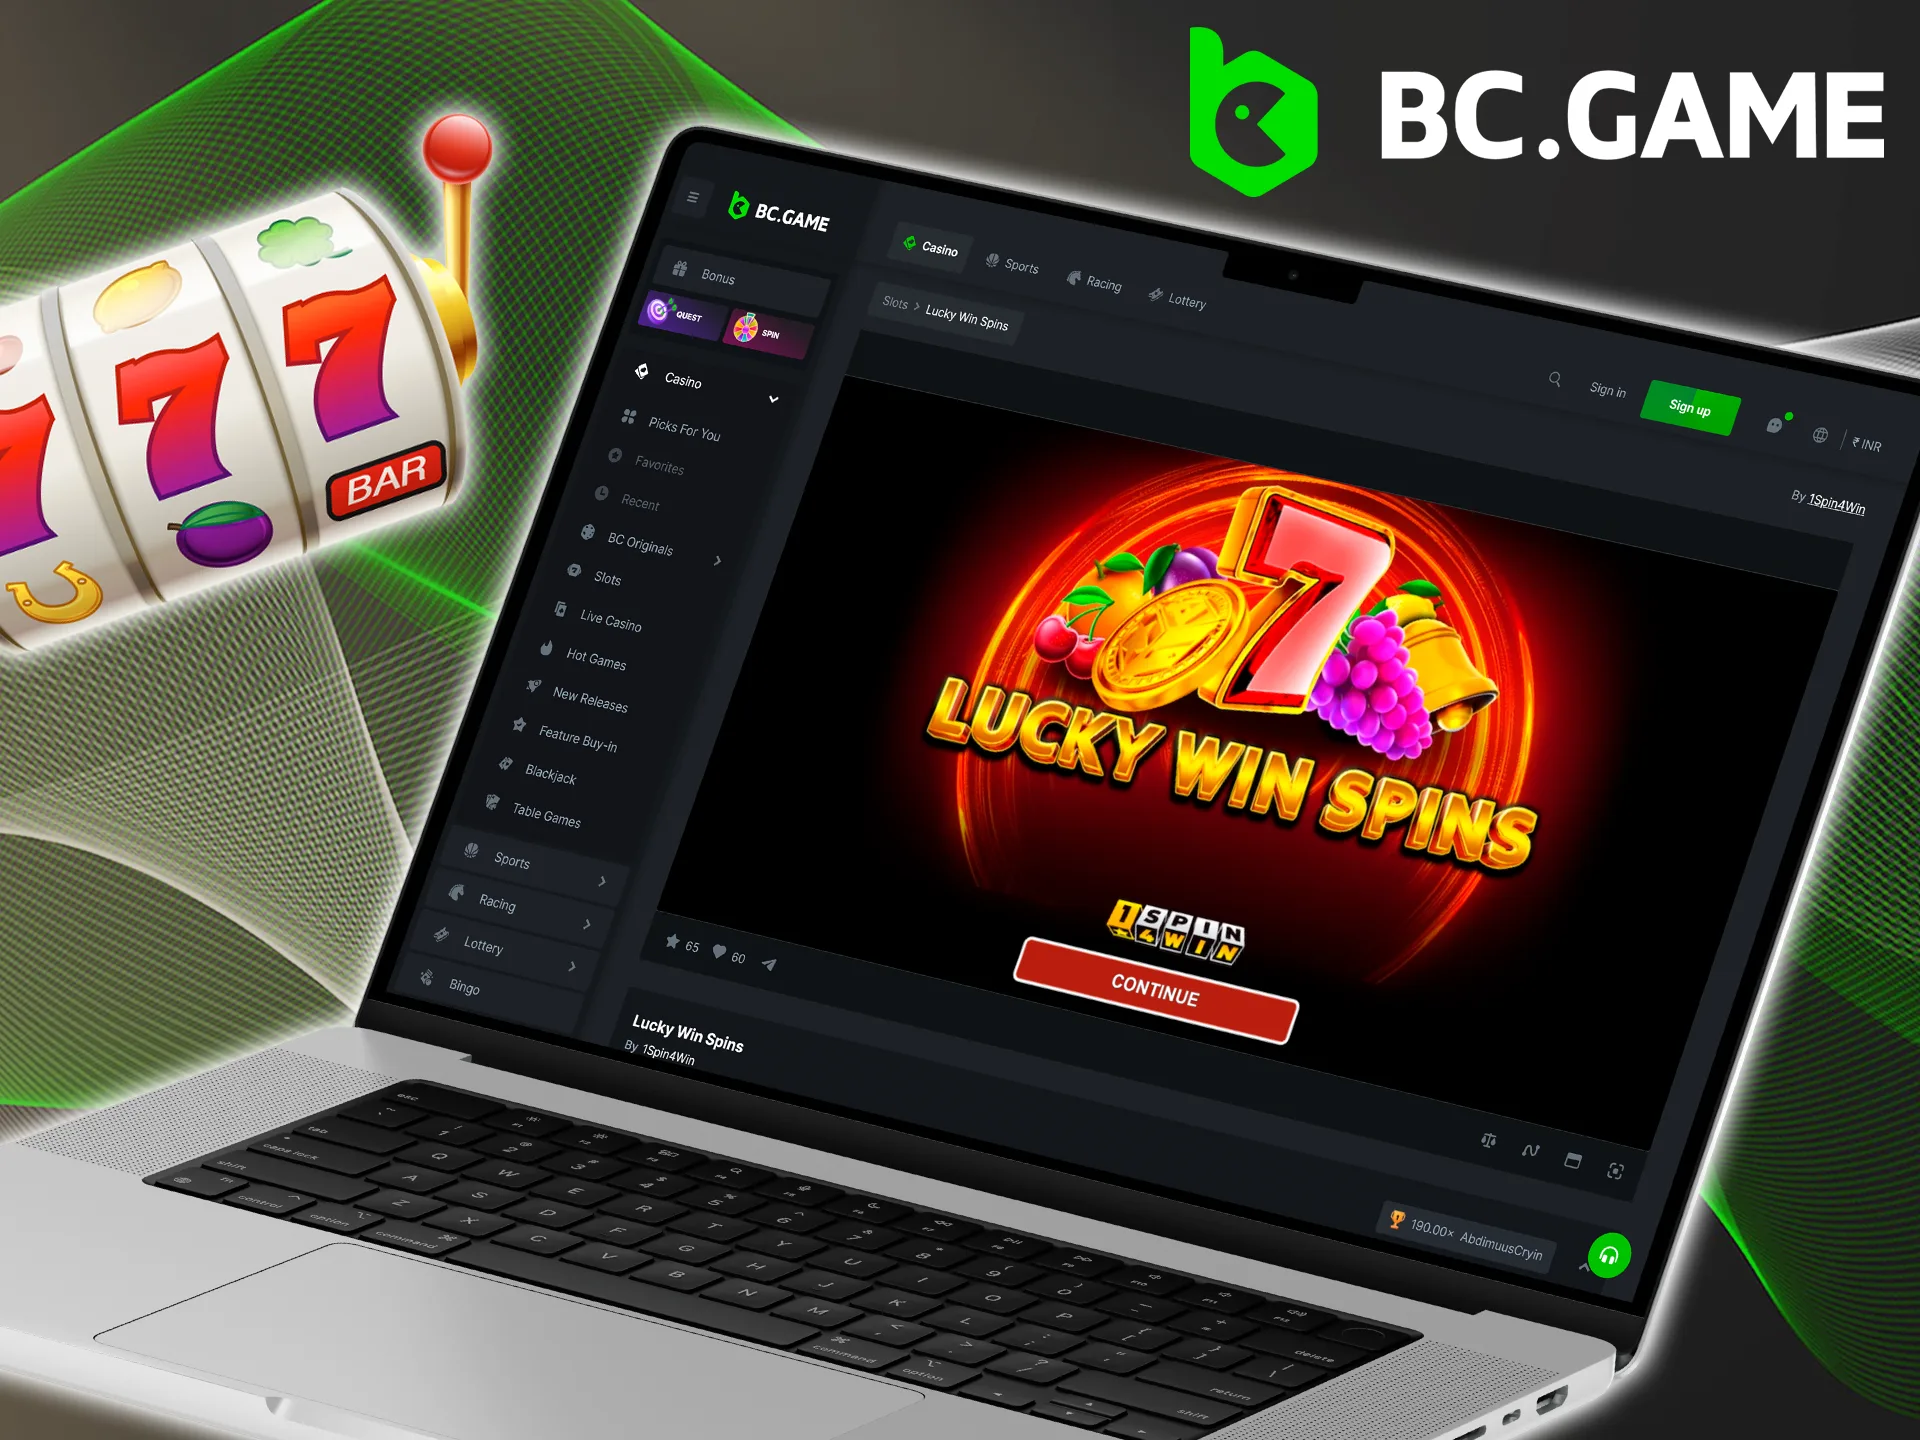 Create a BC Game account and spend your free time with Lucky Win Spins.